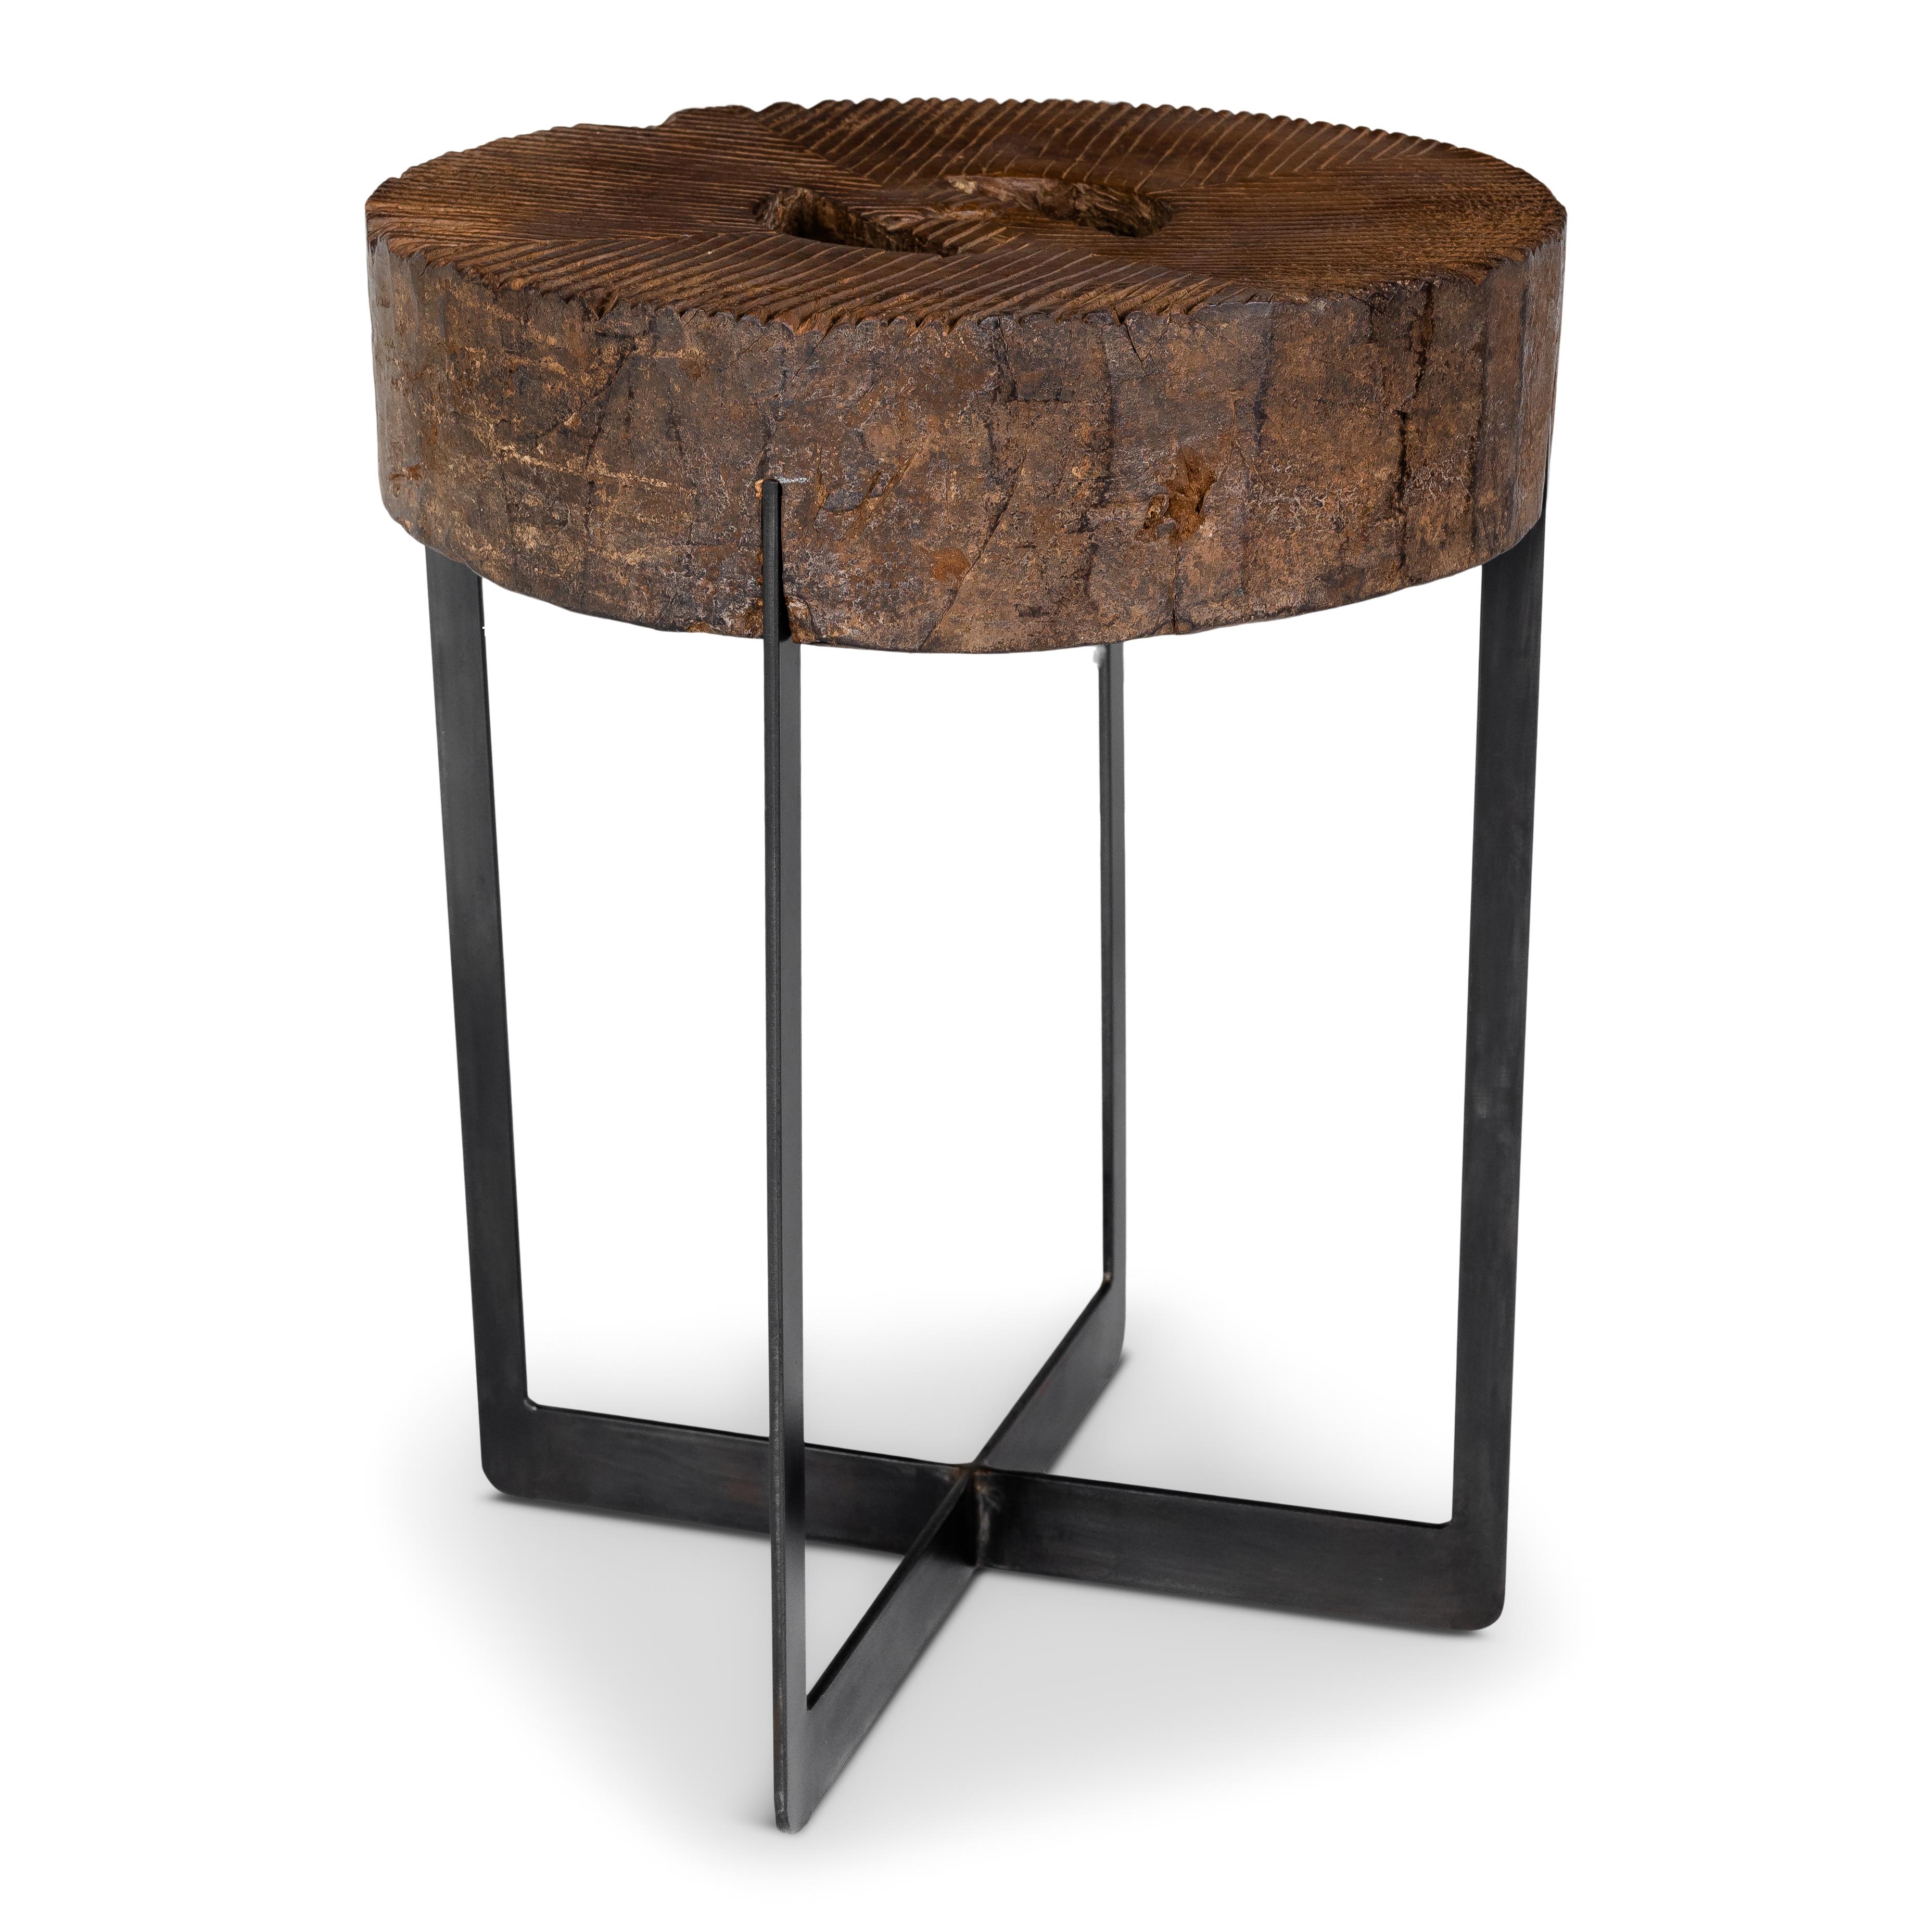 Bailhese wooden mill wheel on ebony patina steel base offers great texture, coloring, and a rustic industrial feel. 

Piece from our one of a kind collection, Le Monde. Exclusive to Brendan Bass.

Globally curated by Brendan Bass, Le Monde